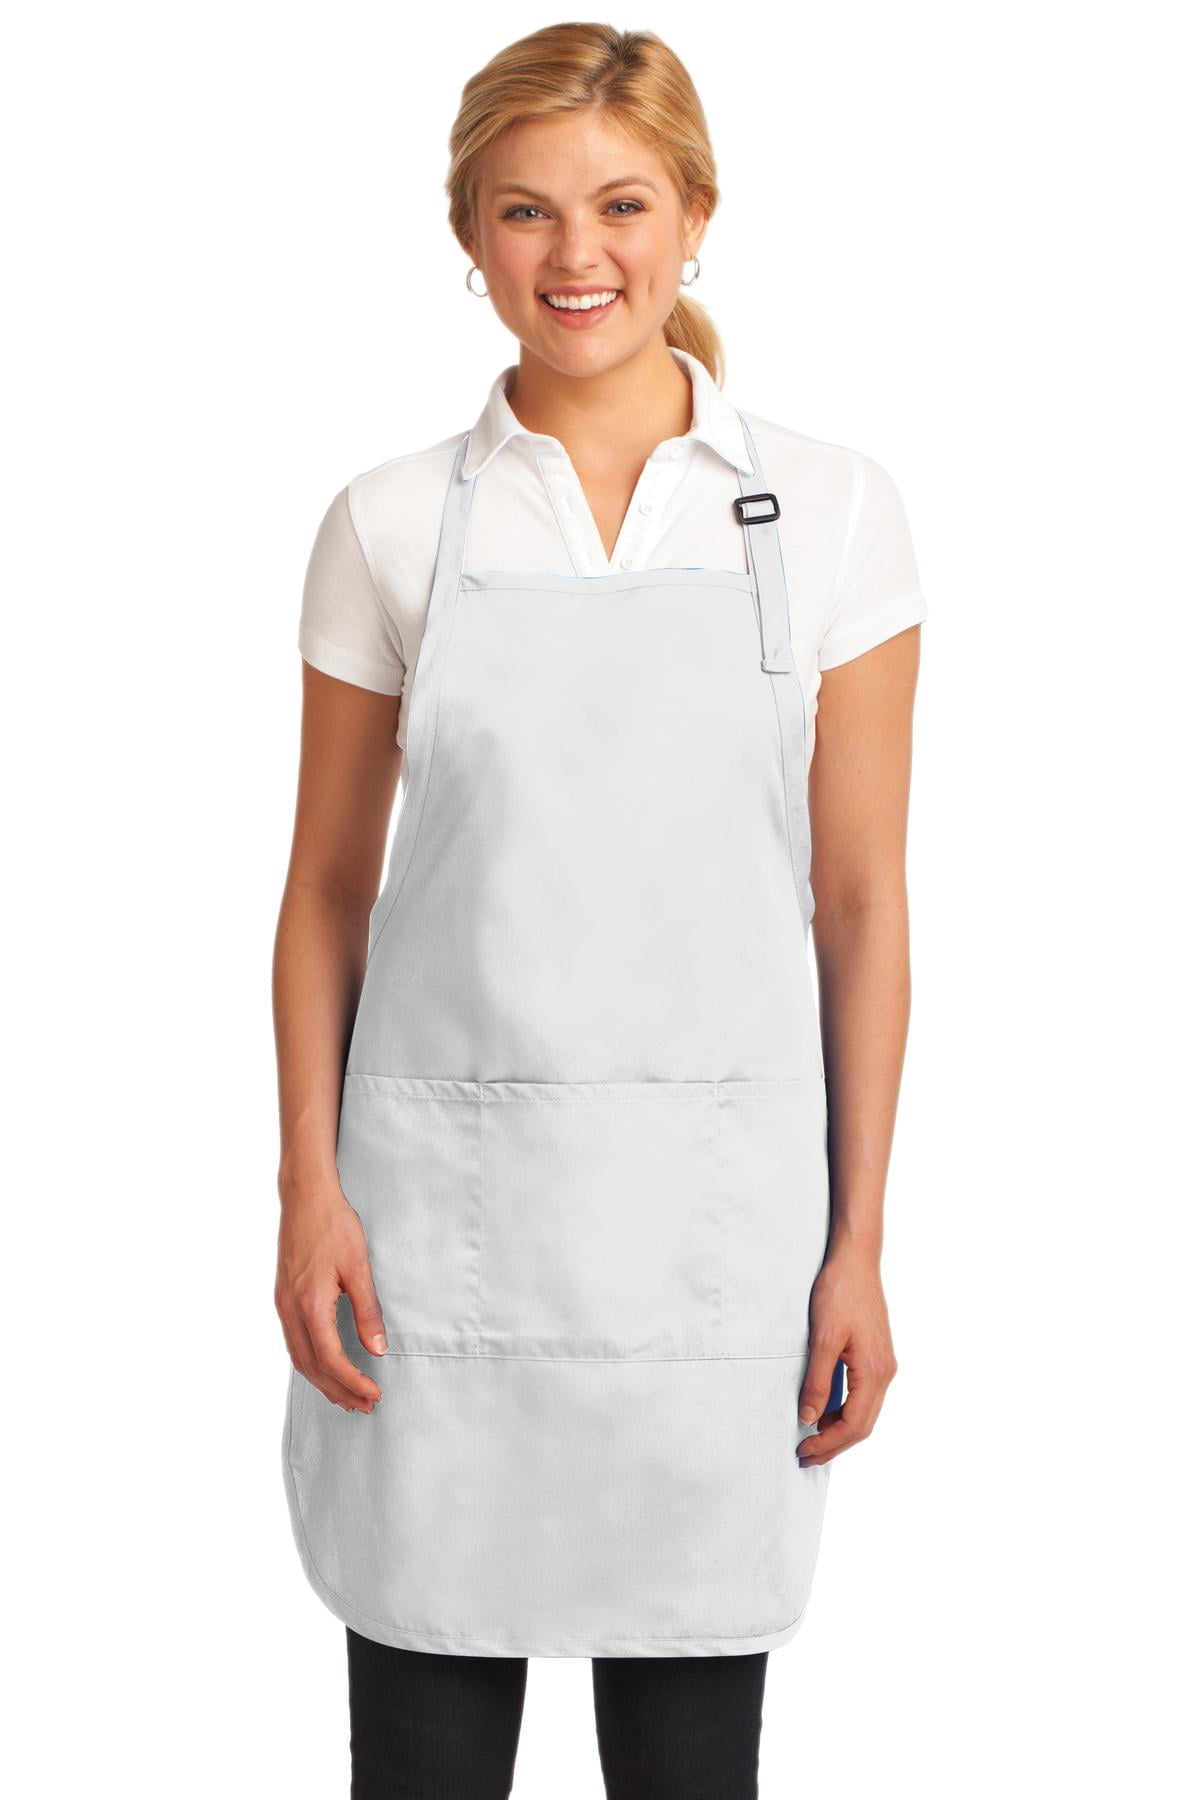 ADULT STAIN RELEASE ADJUSTABLE 1" WIDE STRAPS FULL LENGTH APRON TWO POCKETS